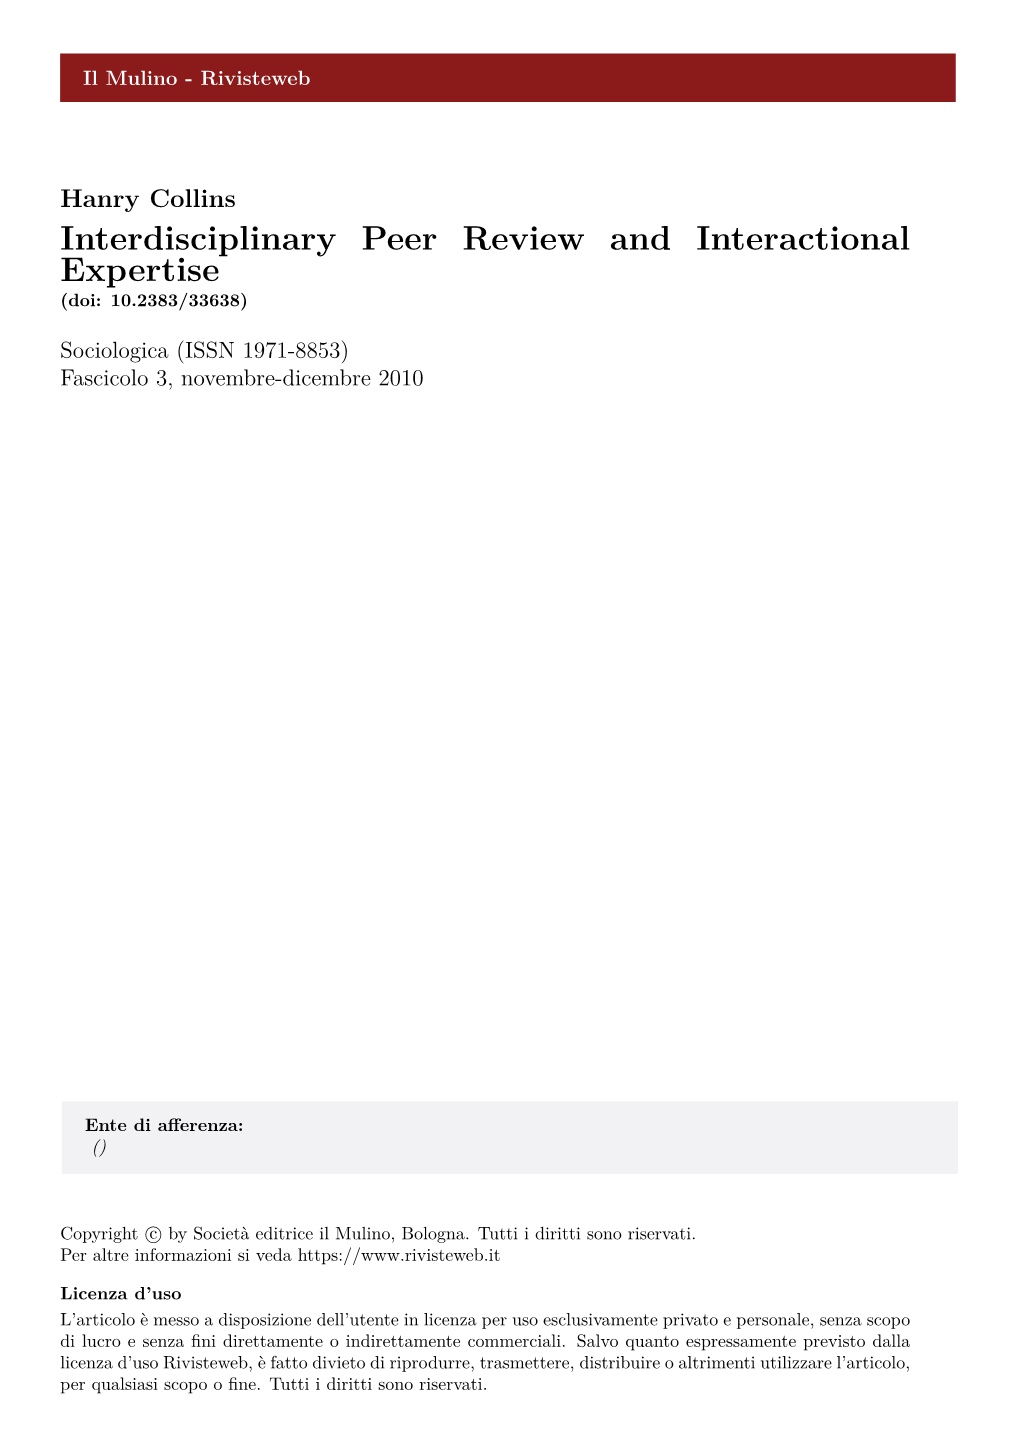 Interdisciplinary Peer Review and Interactional Expertise (Doi: 10.2383/33638)